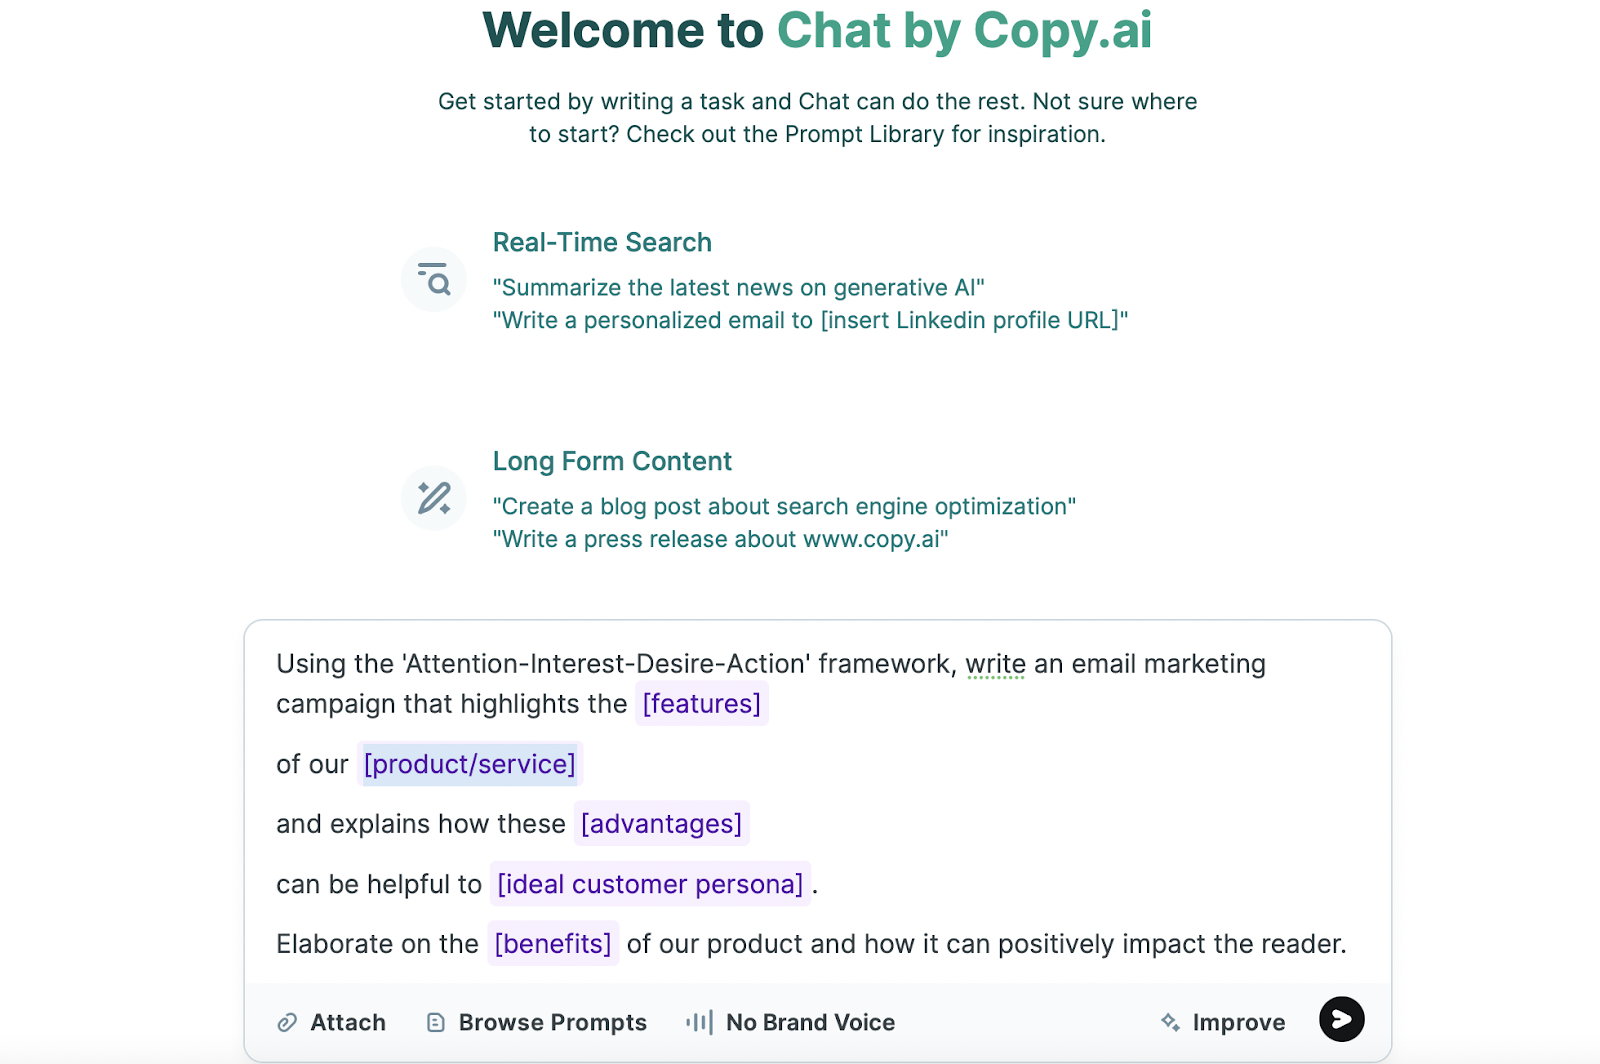 Screenshot of Copy.ai, which offers a brand voice feature.